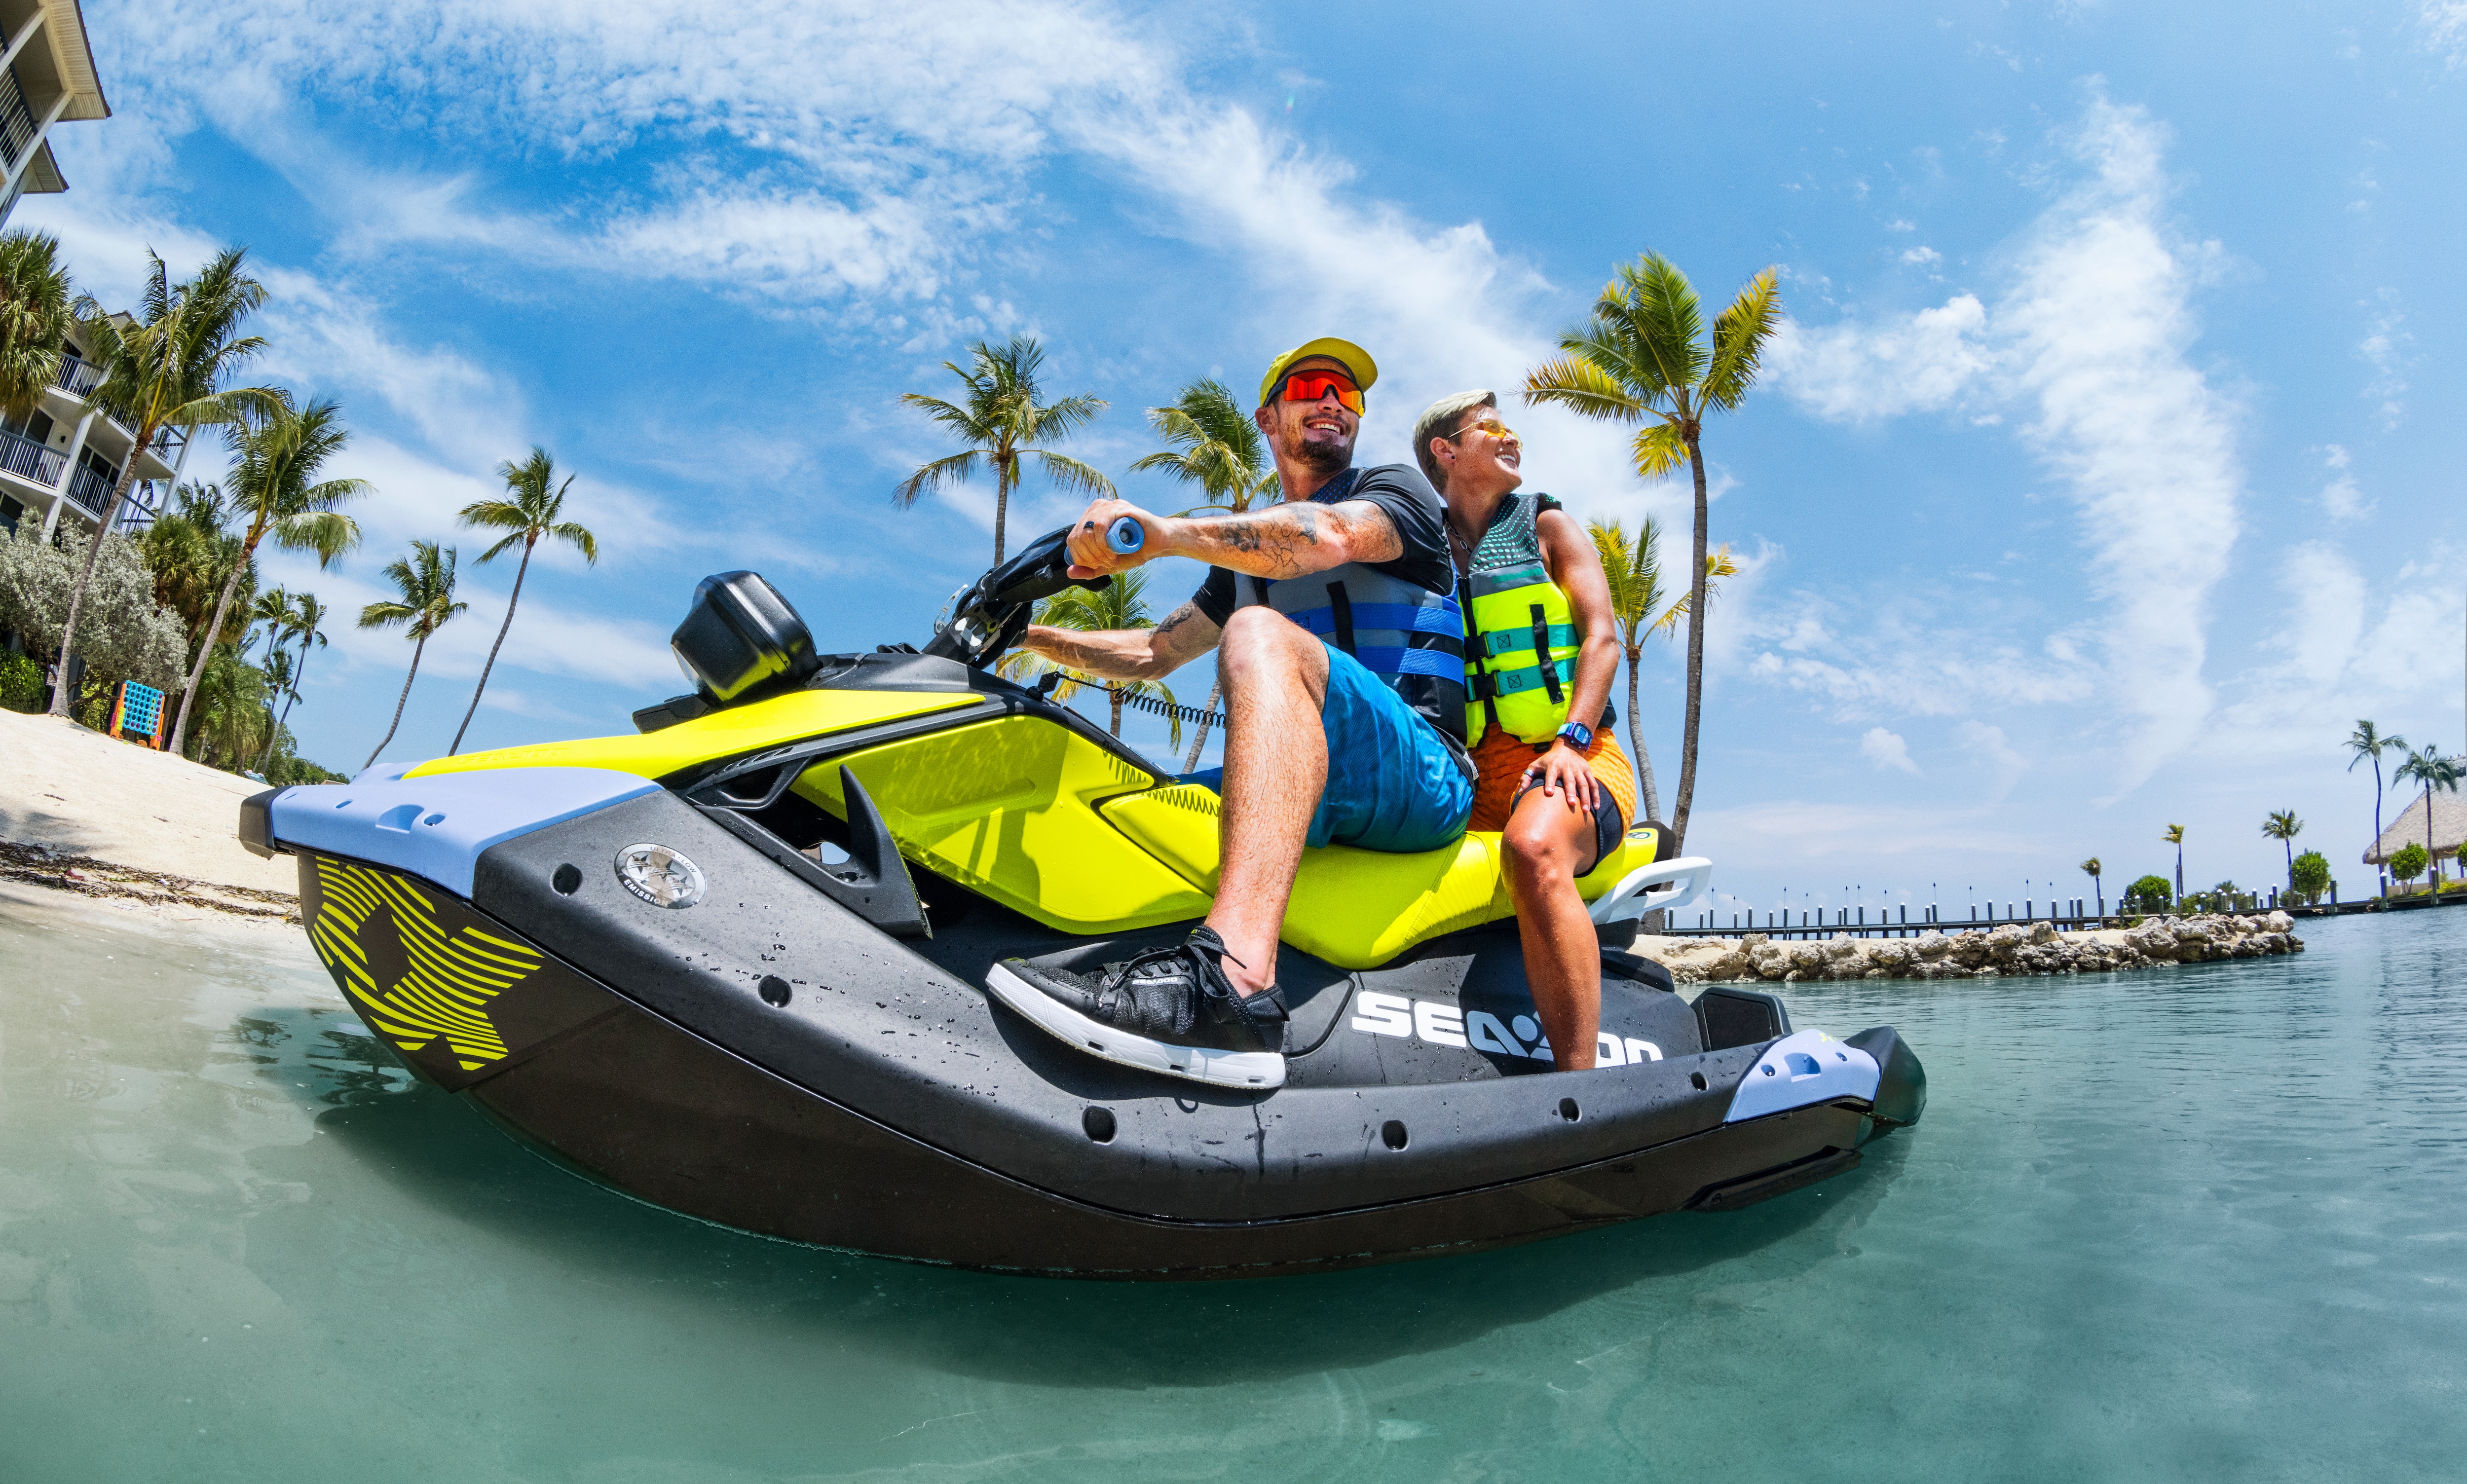 Man about to jump from a Sea-Doo Spark's platform